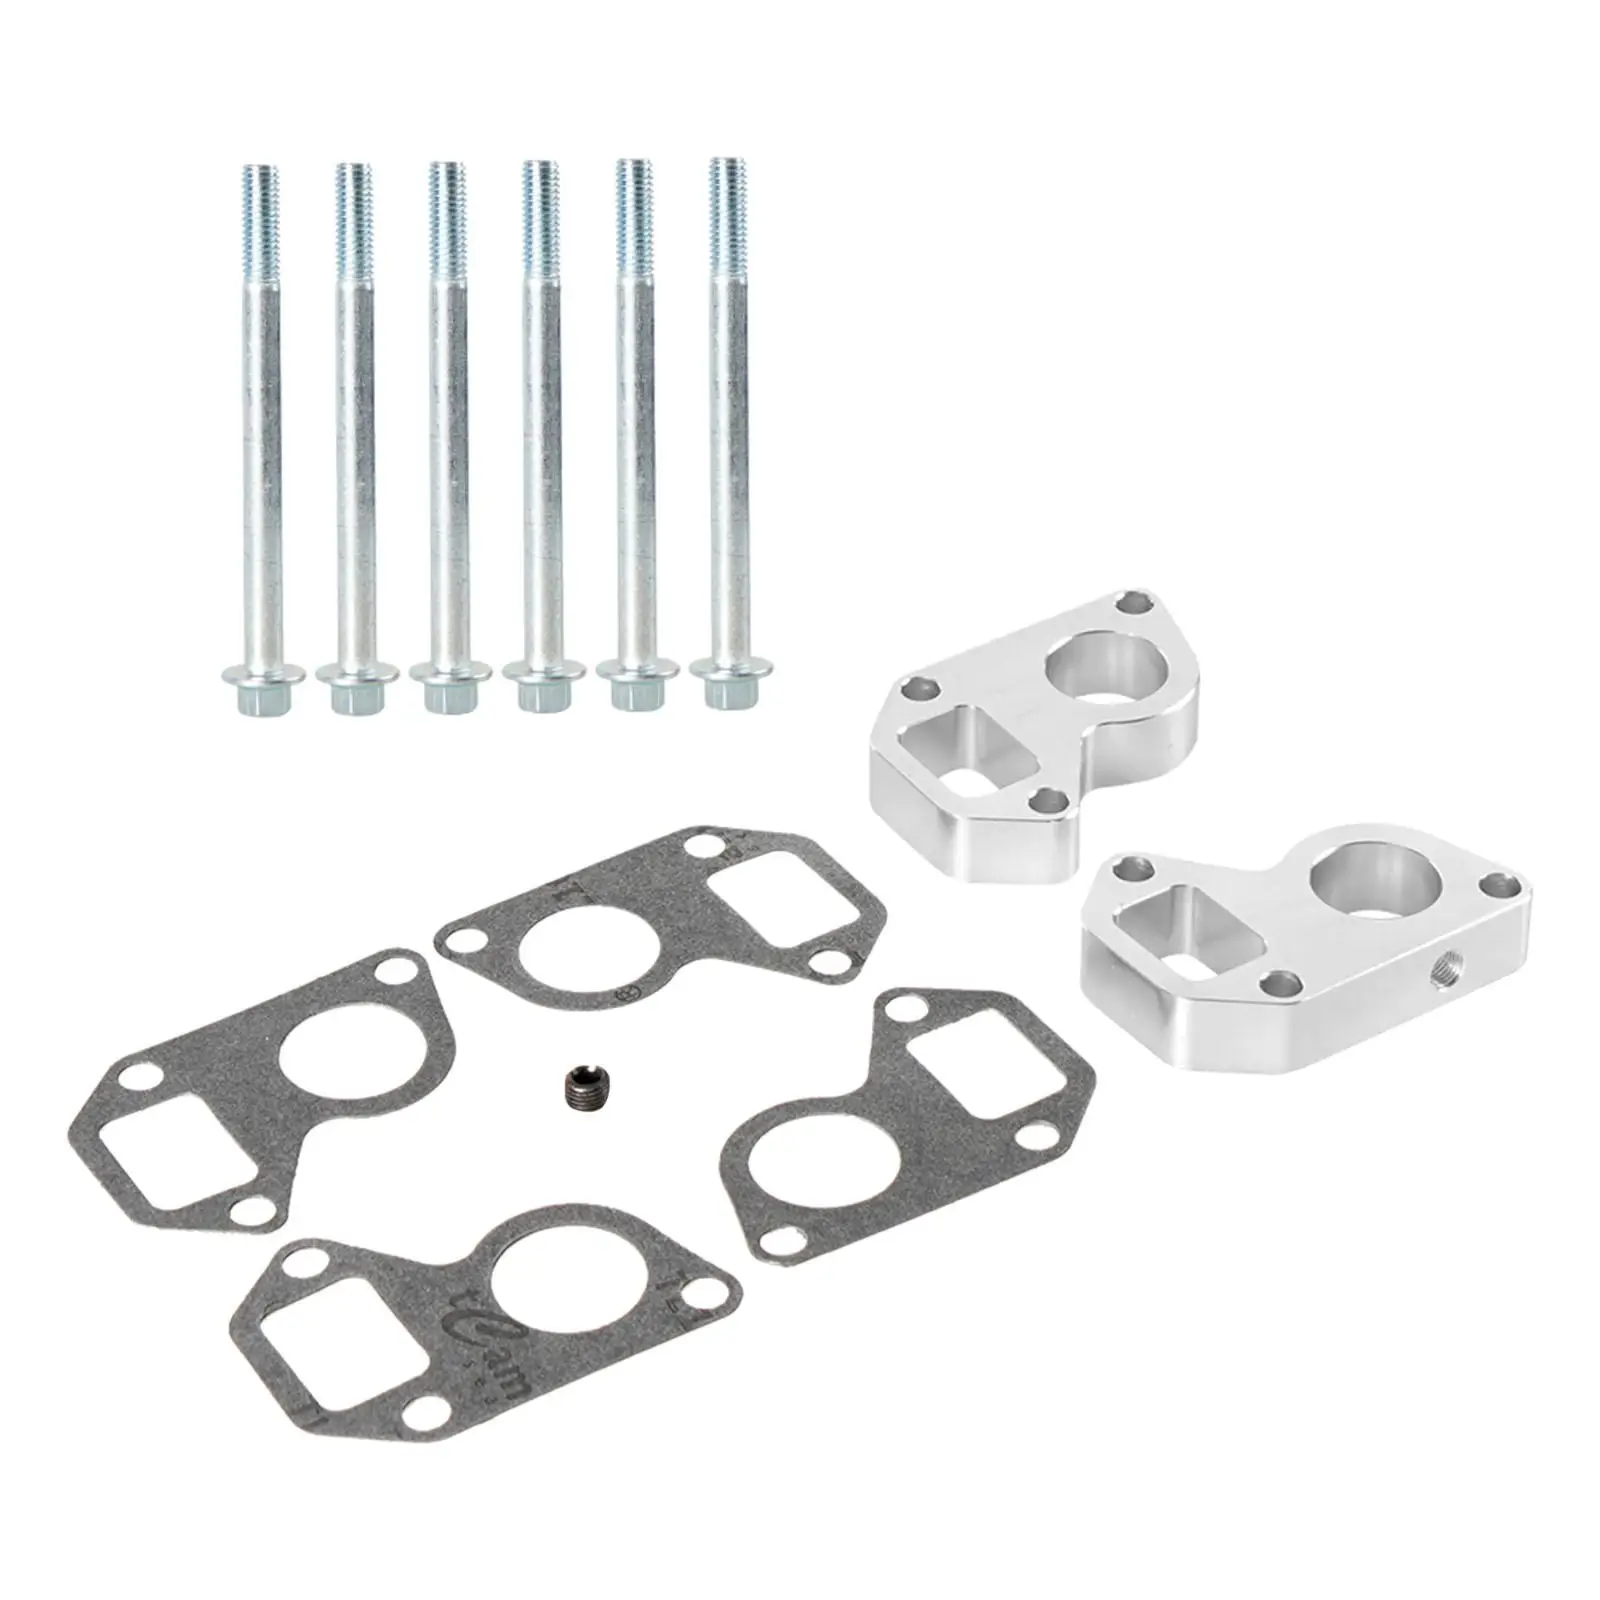 Water Pump Spacer Truck Adapter Swap Kit Fit for LS1 Spare Parts Durable